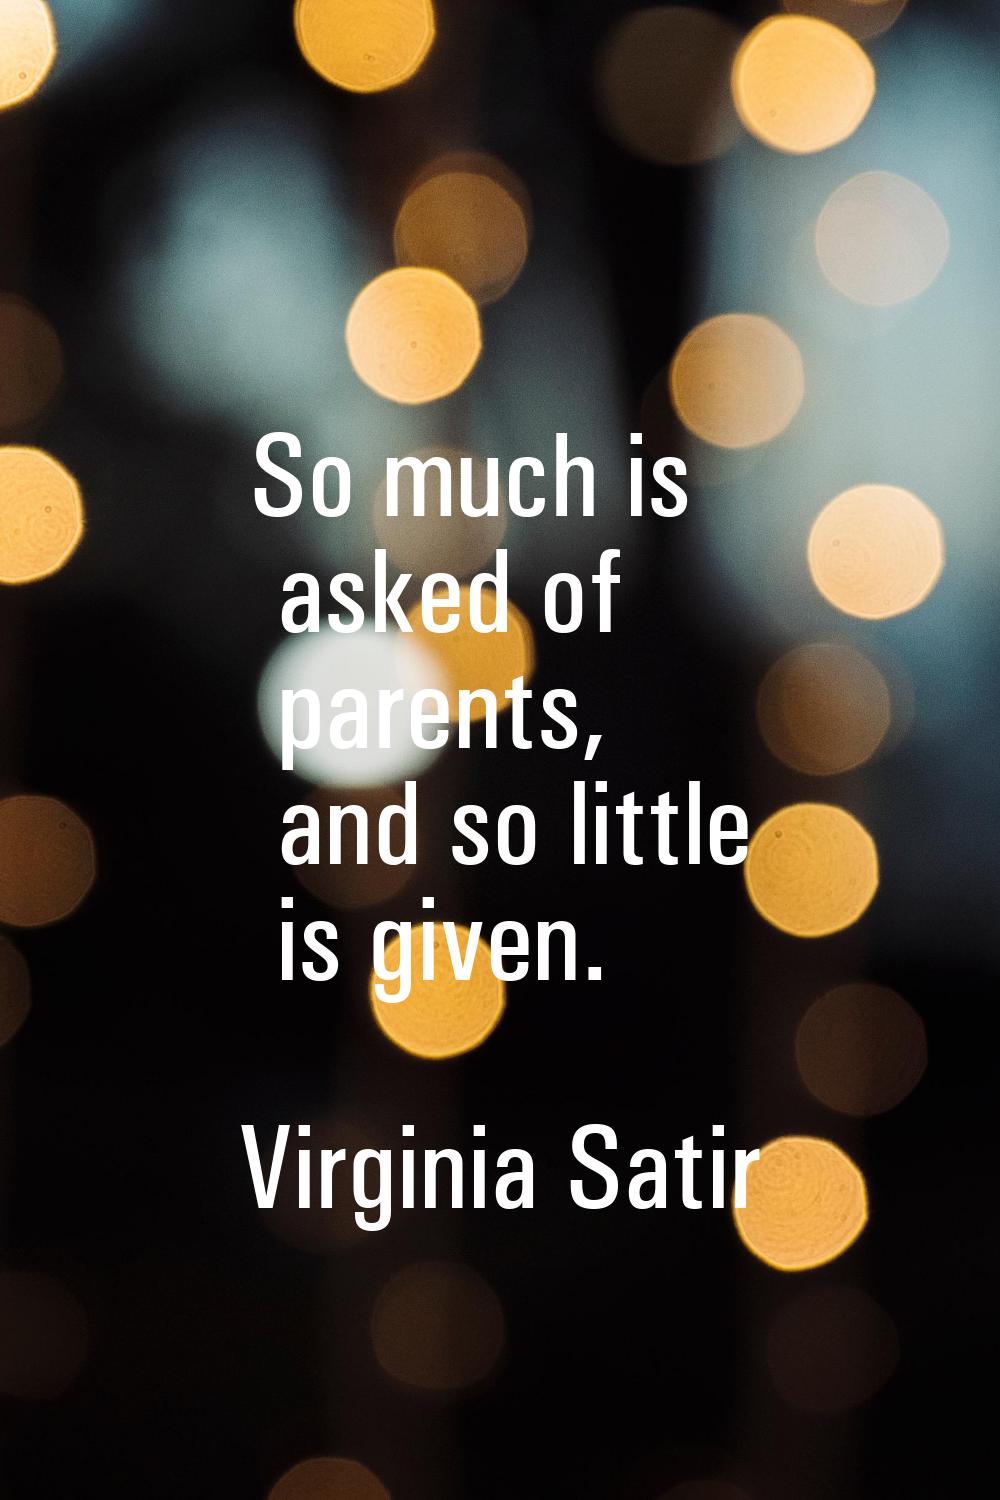 So much is asked of parents, and so little is given.